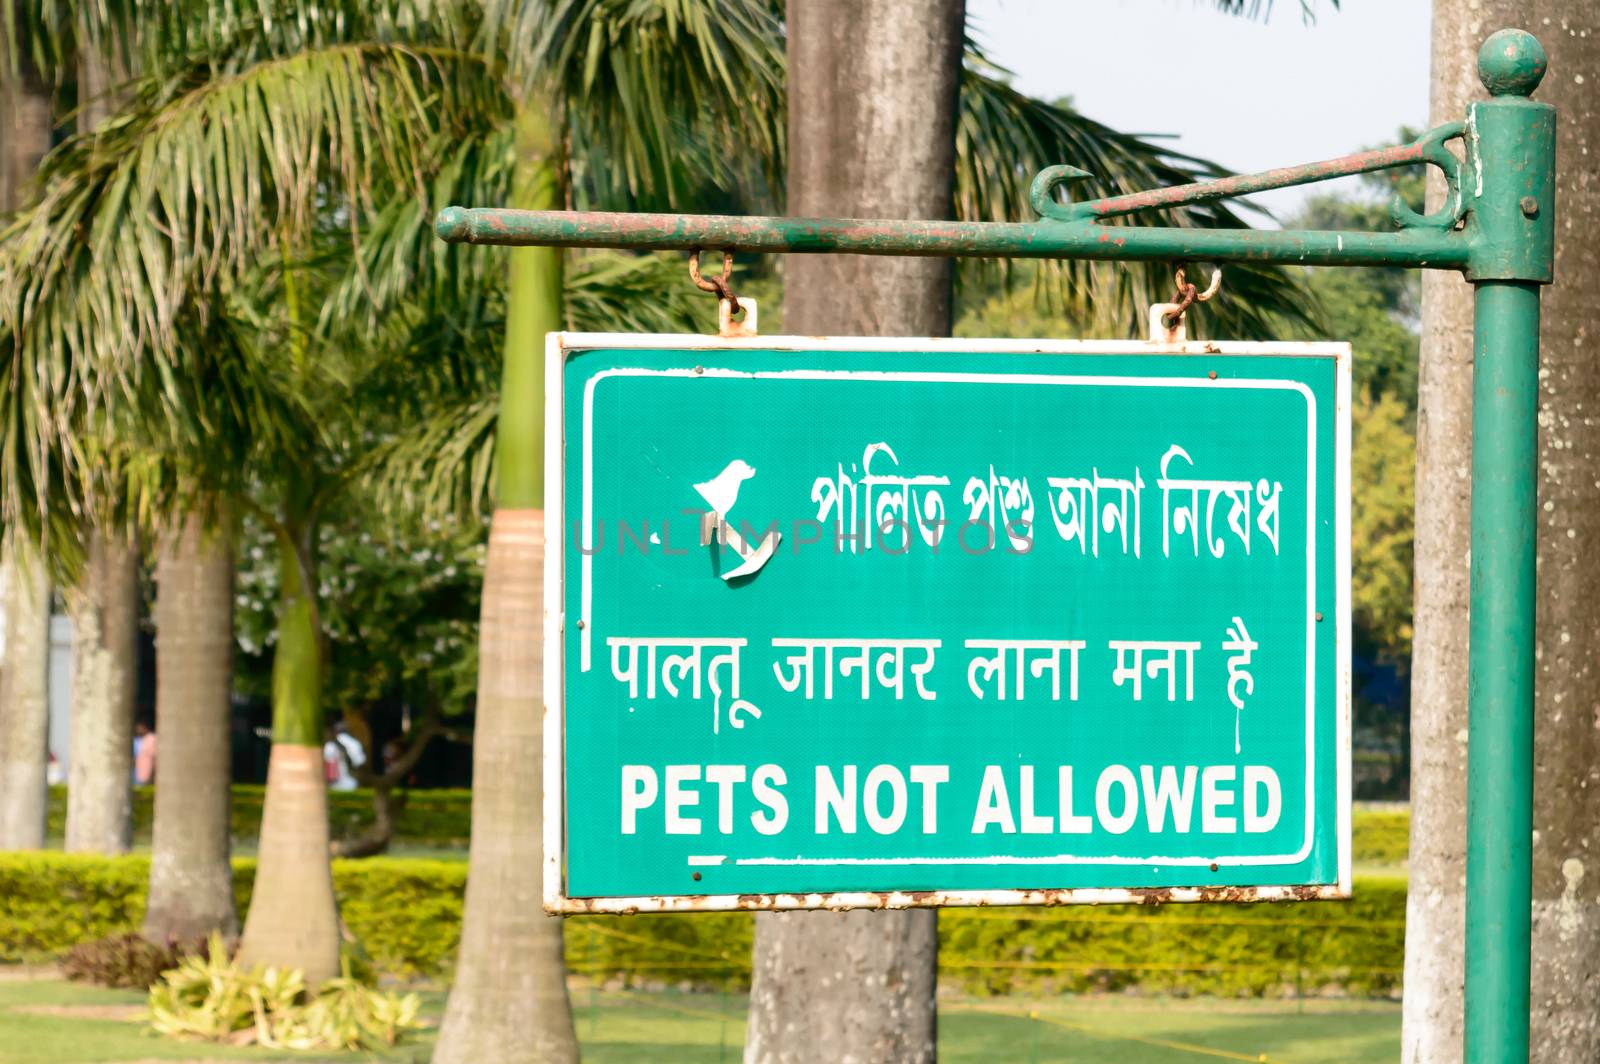 Pets Not Allowed Sign Board On park garden. No pets allowed sign board. permission concept background.